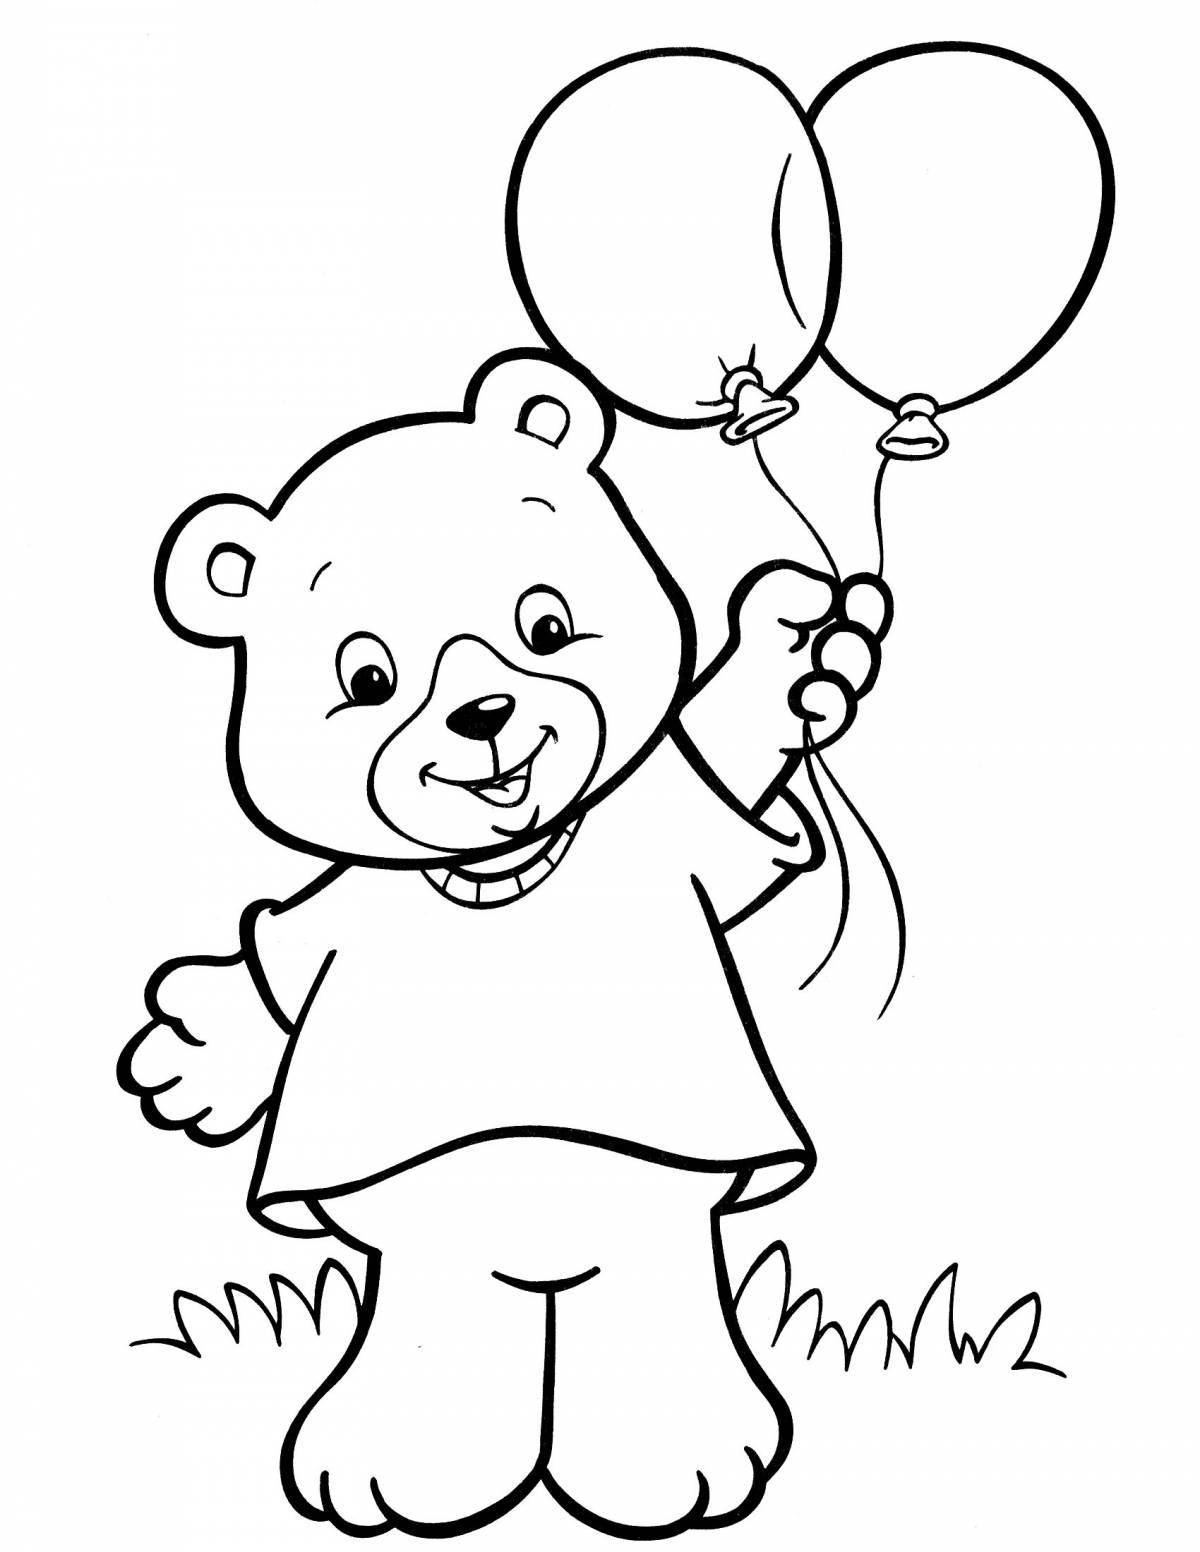 Great coloring book for kids 3 4